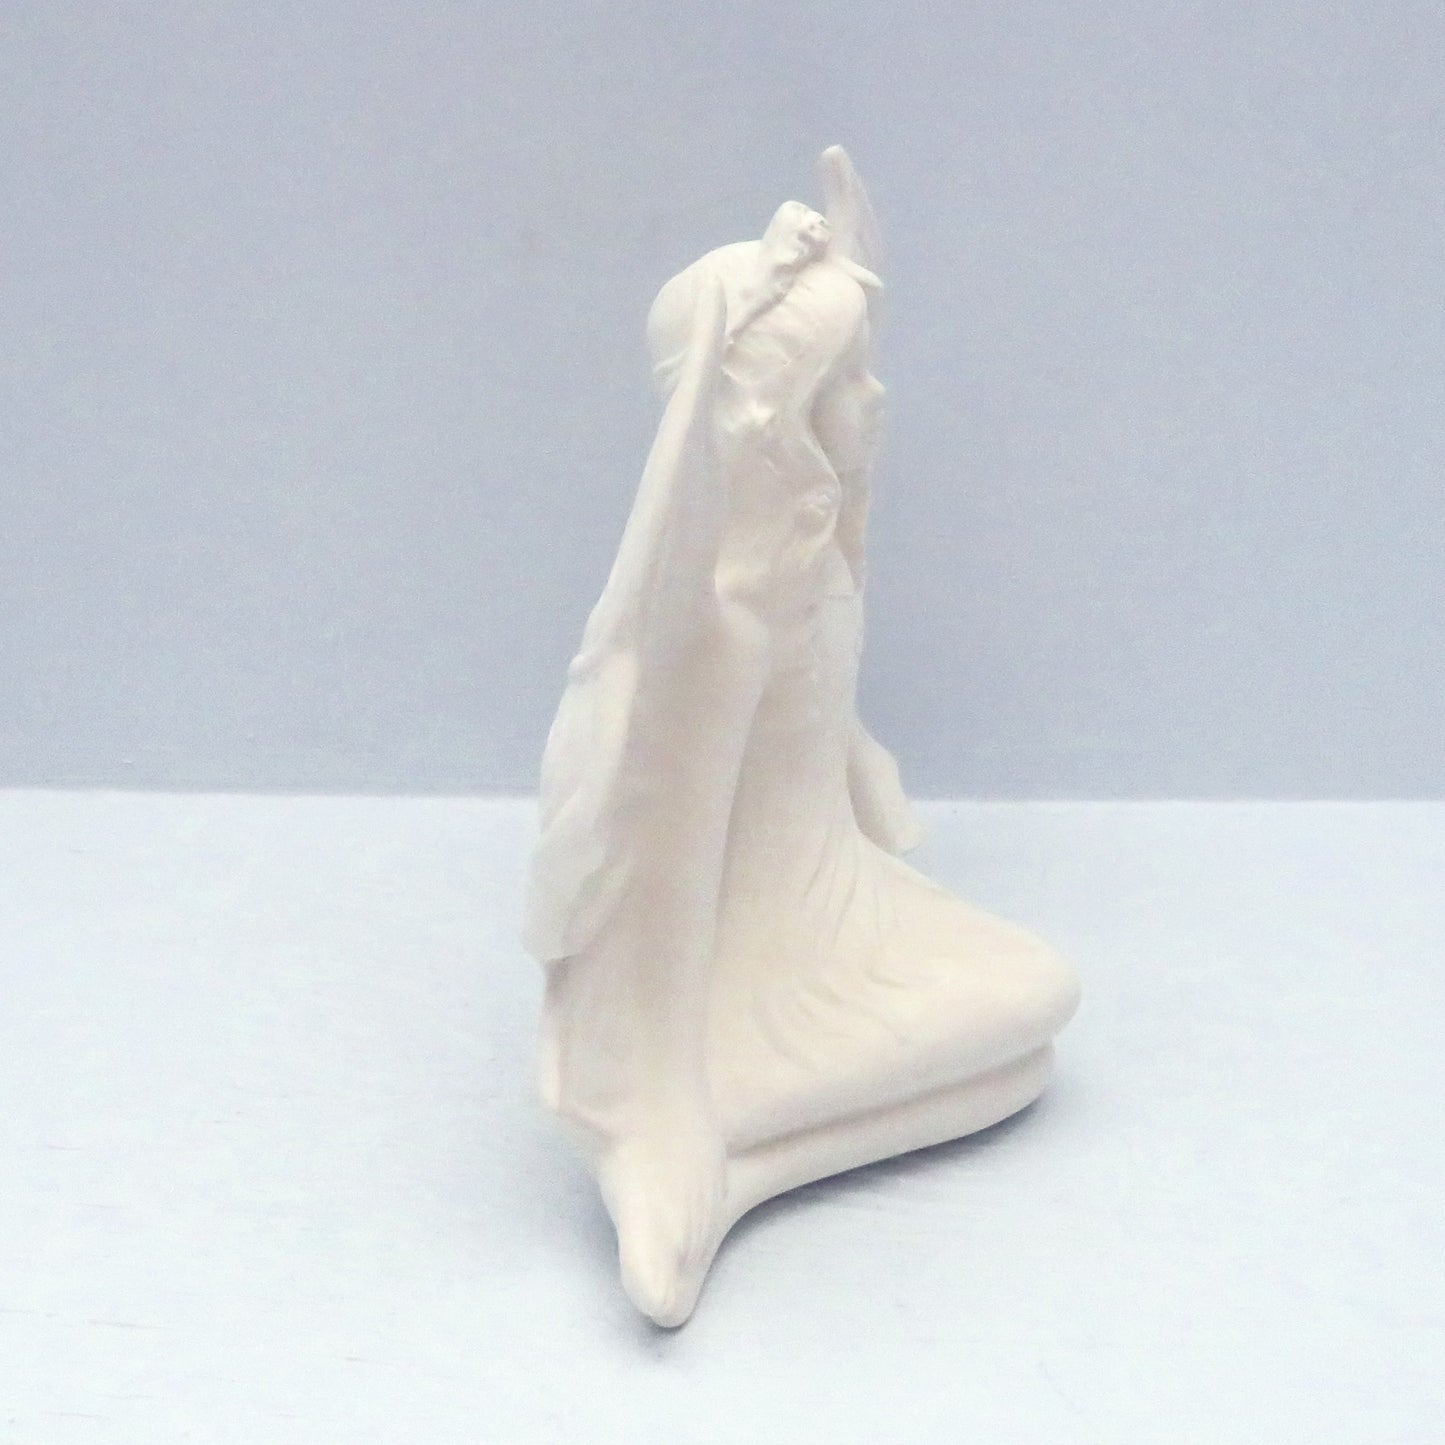 Handmade unpainted bisque fairy figurine facing to the right sitting with her legs to the right on a plae blue surface